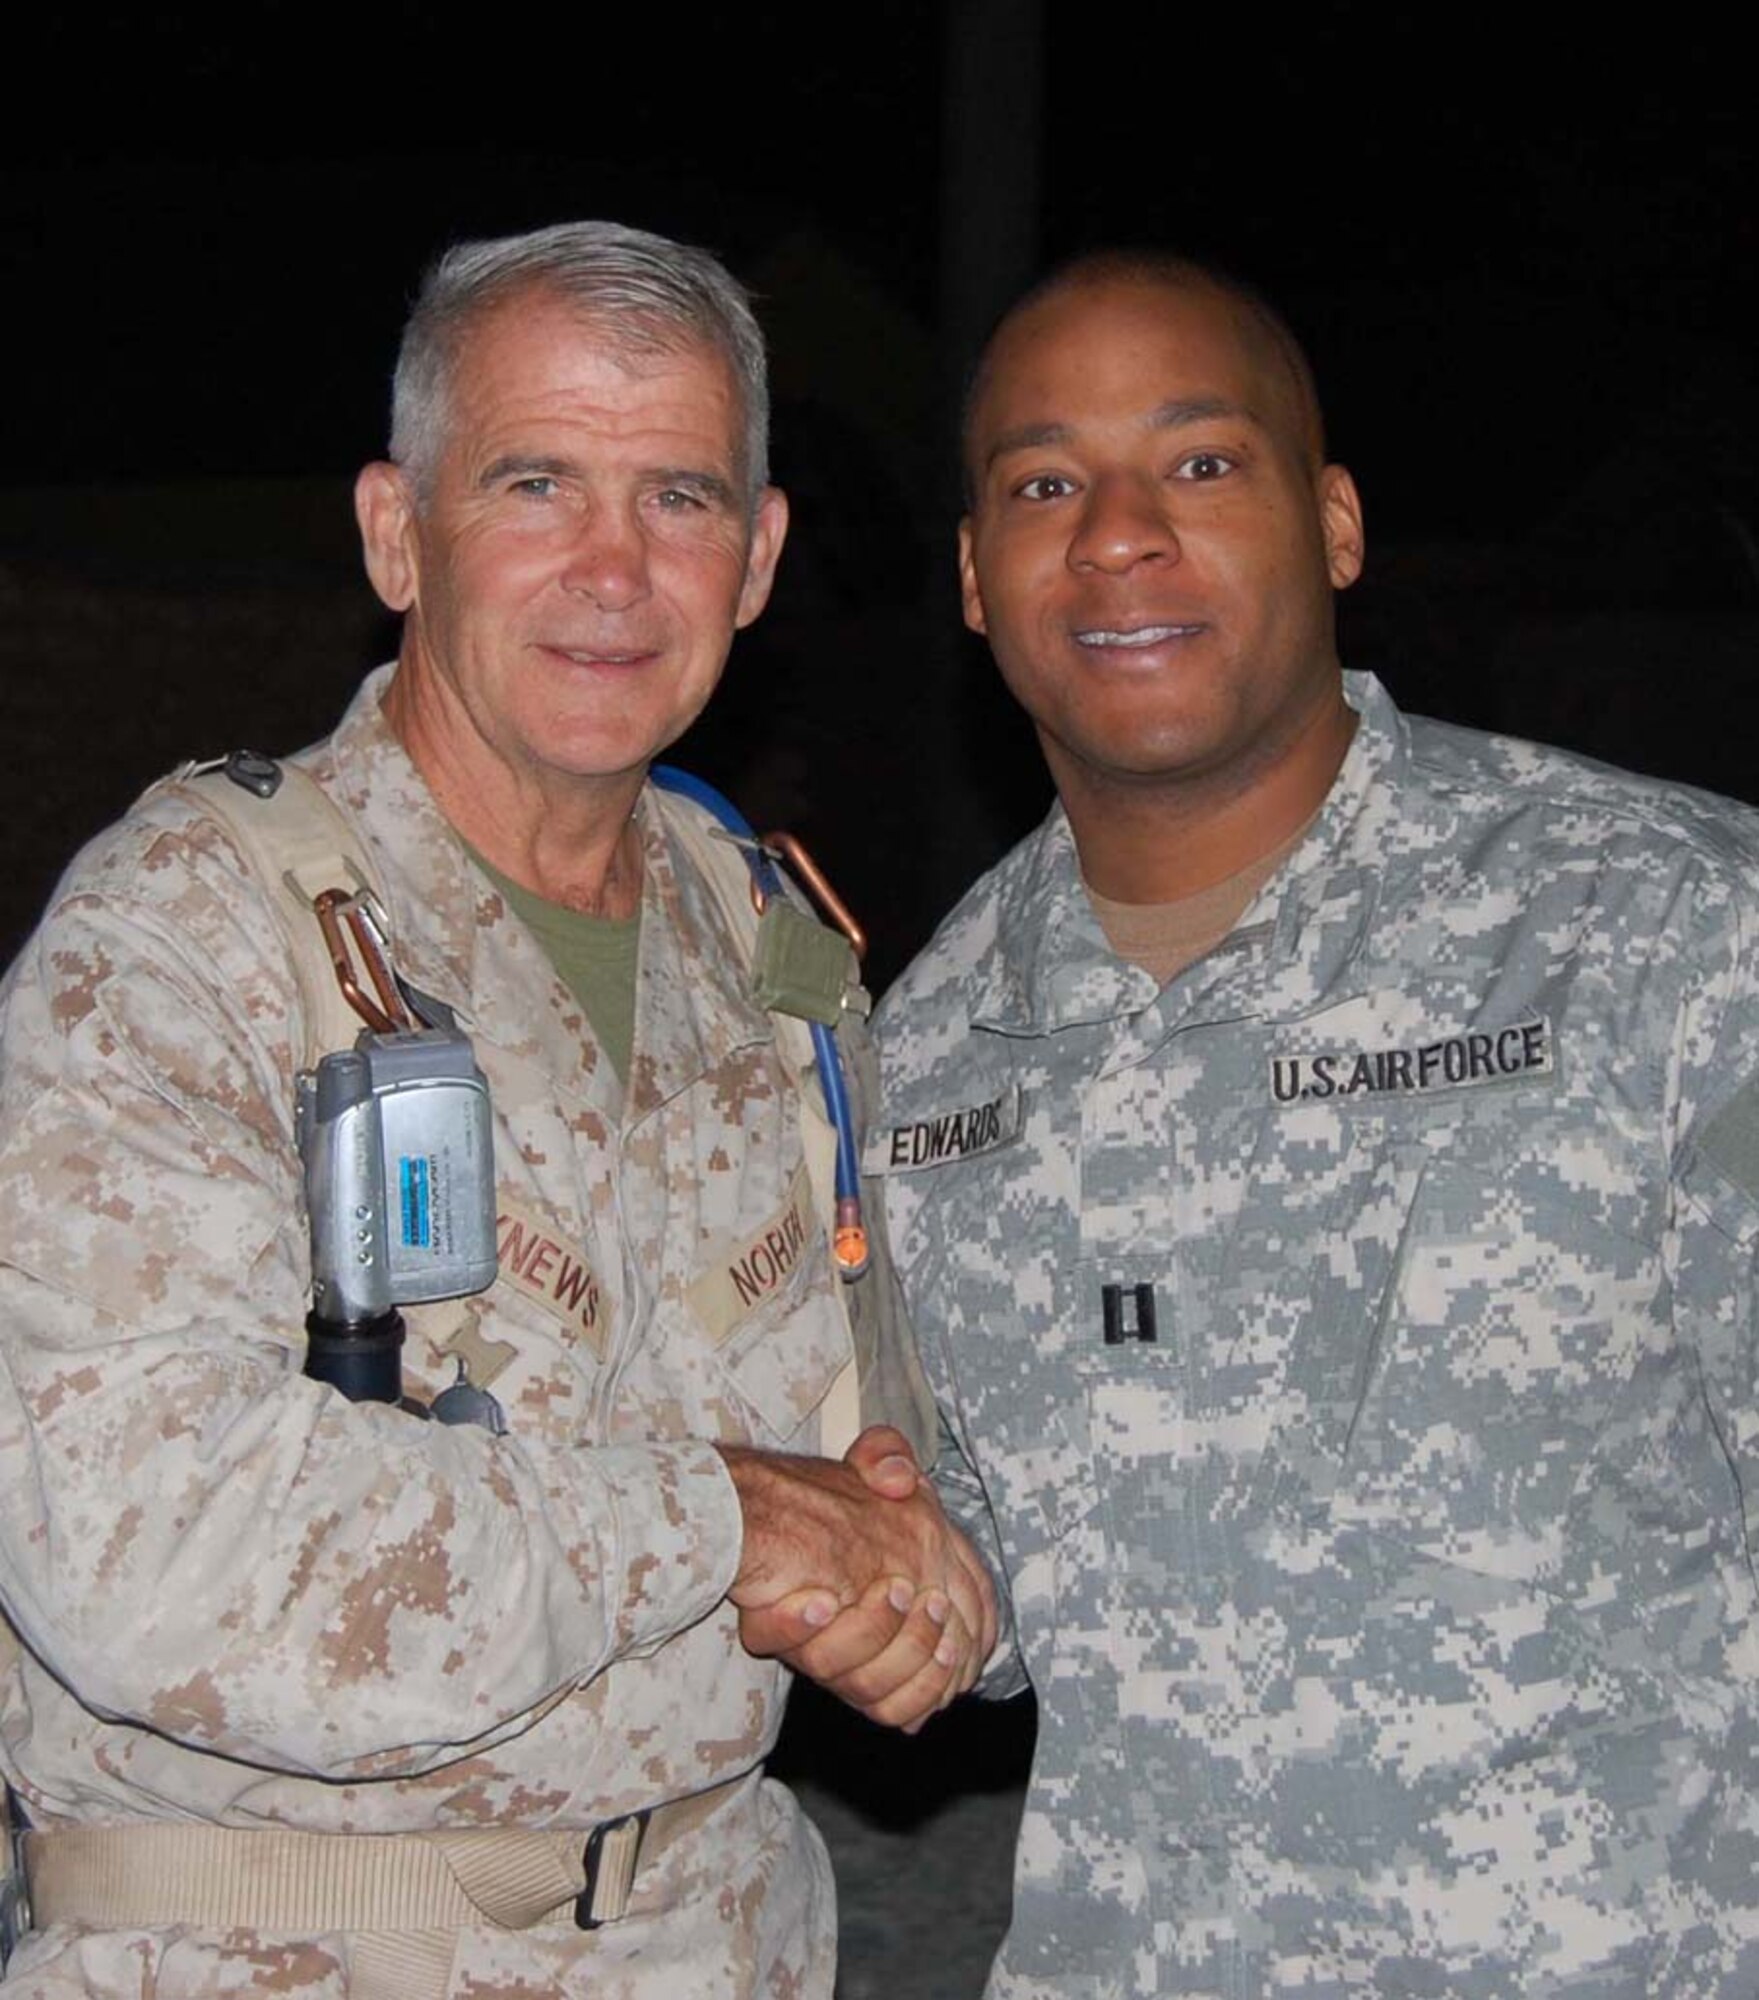 Maj. (then captain) Tony Edwards (right) meets retired Marine Lt. Col. Oliver North in Afghanistan.  Major Edwards, a Reservist assigned to the 446th Logistics Readiness Flight, McChord Air Force Base, Wash., earned the Bronze Star while deployed to Afghanistan for six months. Colonel North was in Afghanistan filming a documentary. (Courtesy photo)